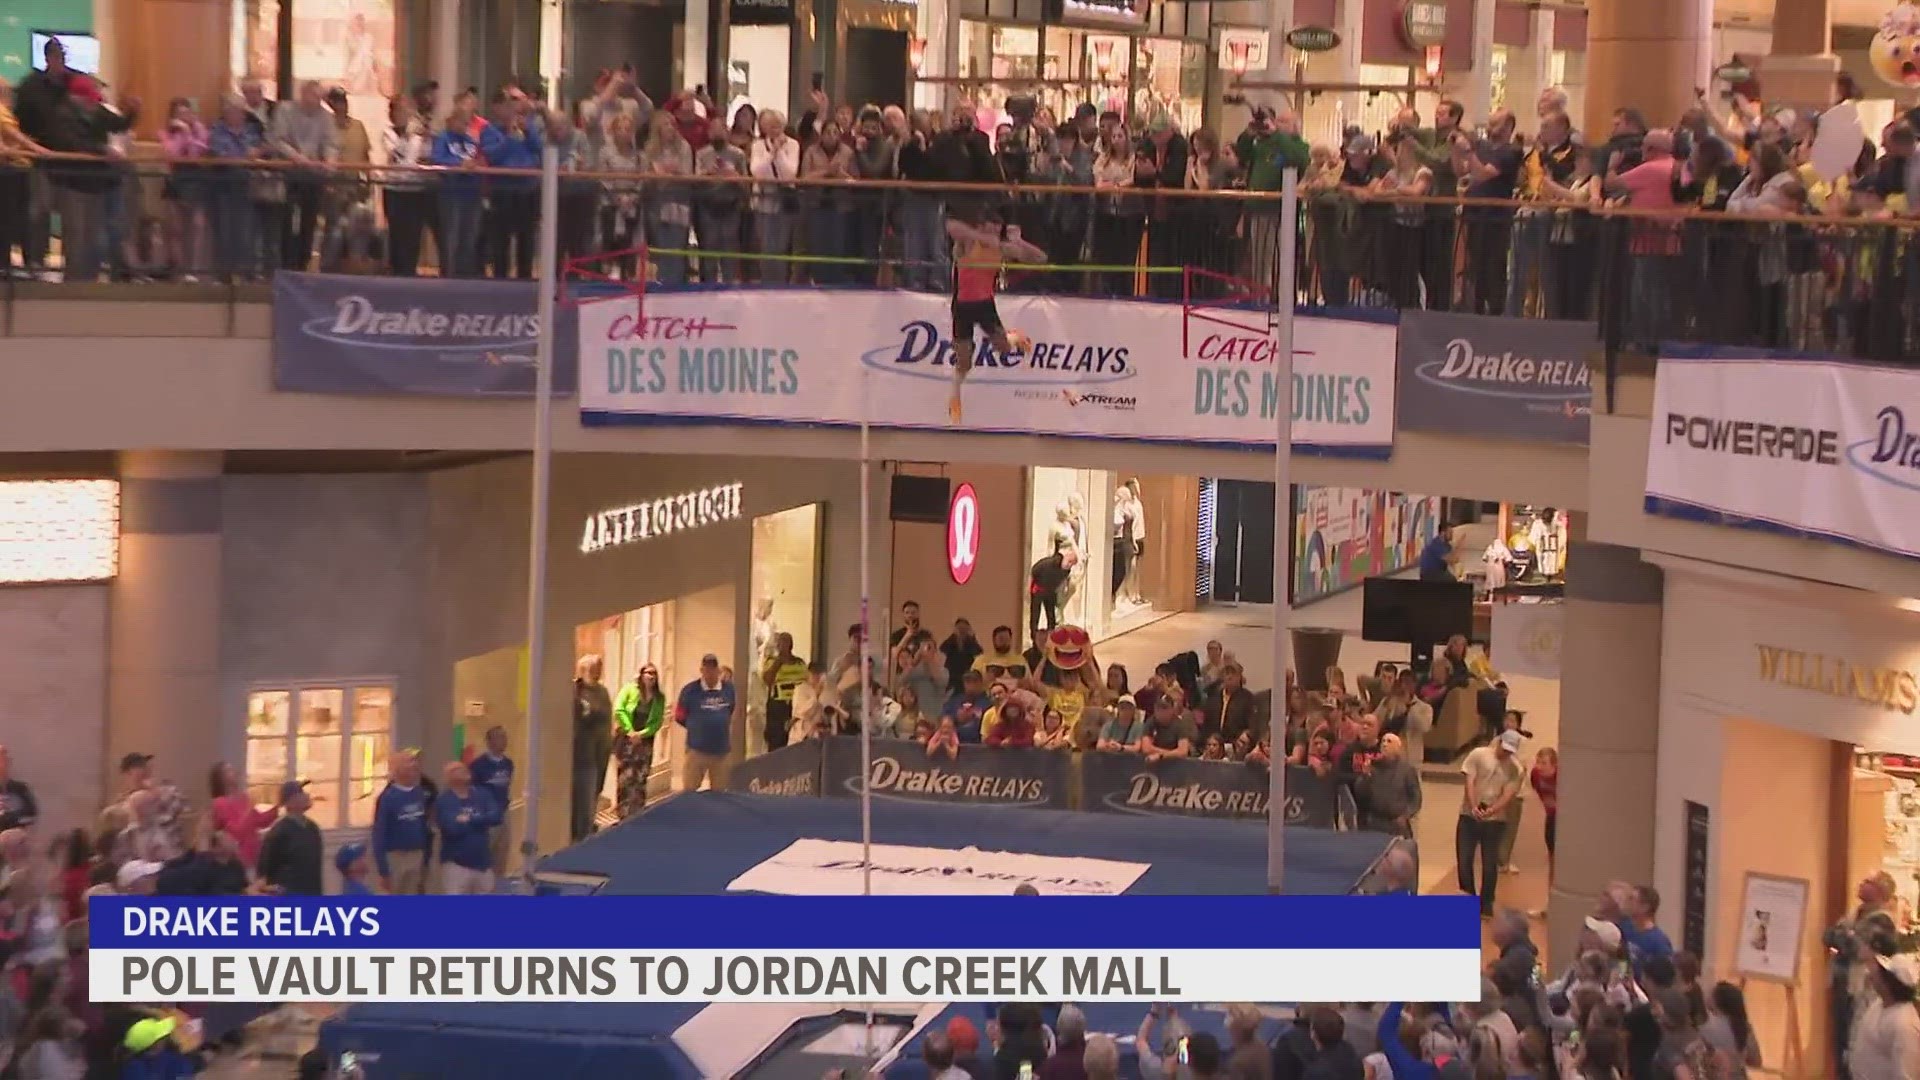 The event was last held at the mall in 2014. It's a venue that allows spectators to watch the competition, hosted in the mall's center court area, from above.